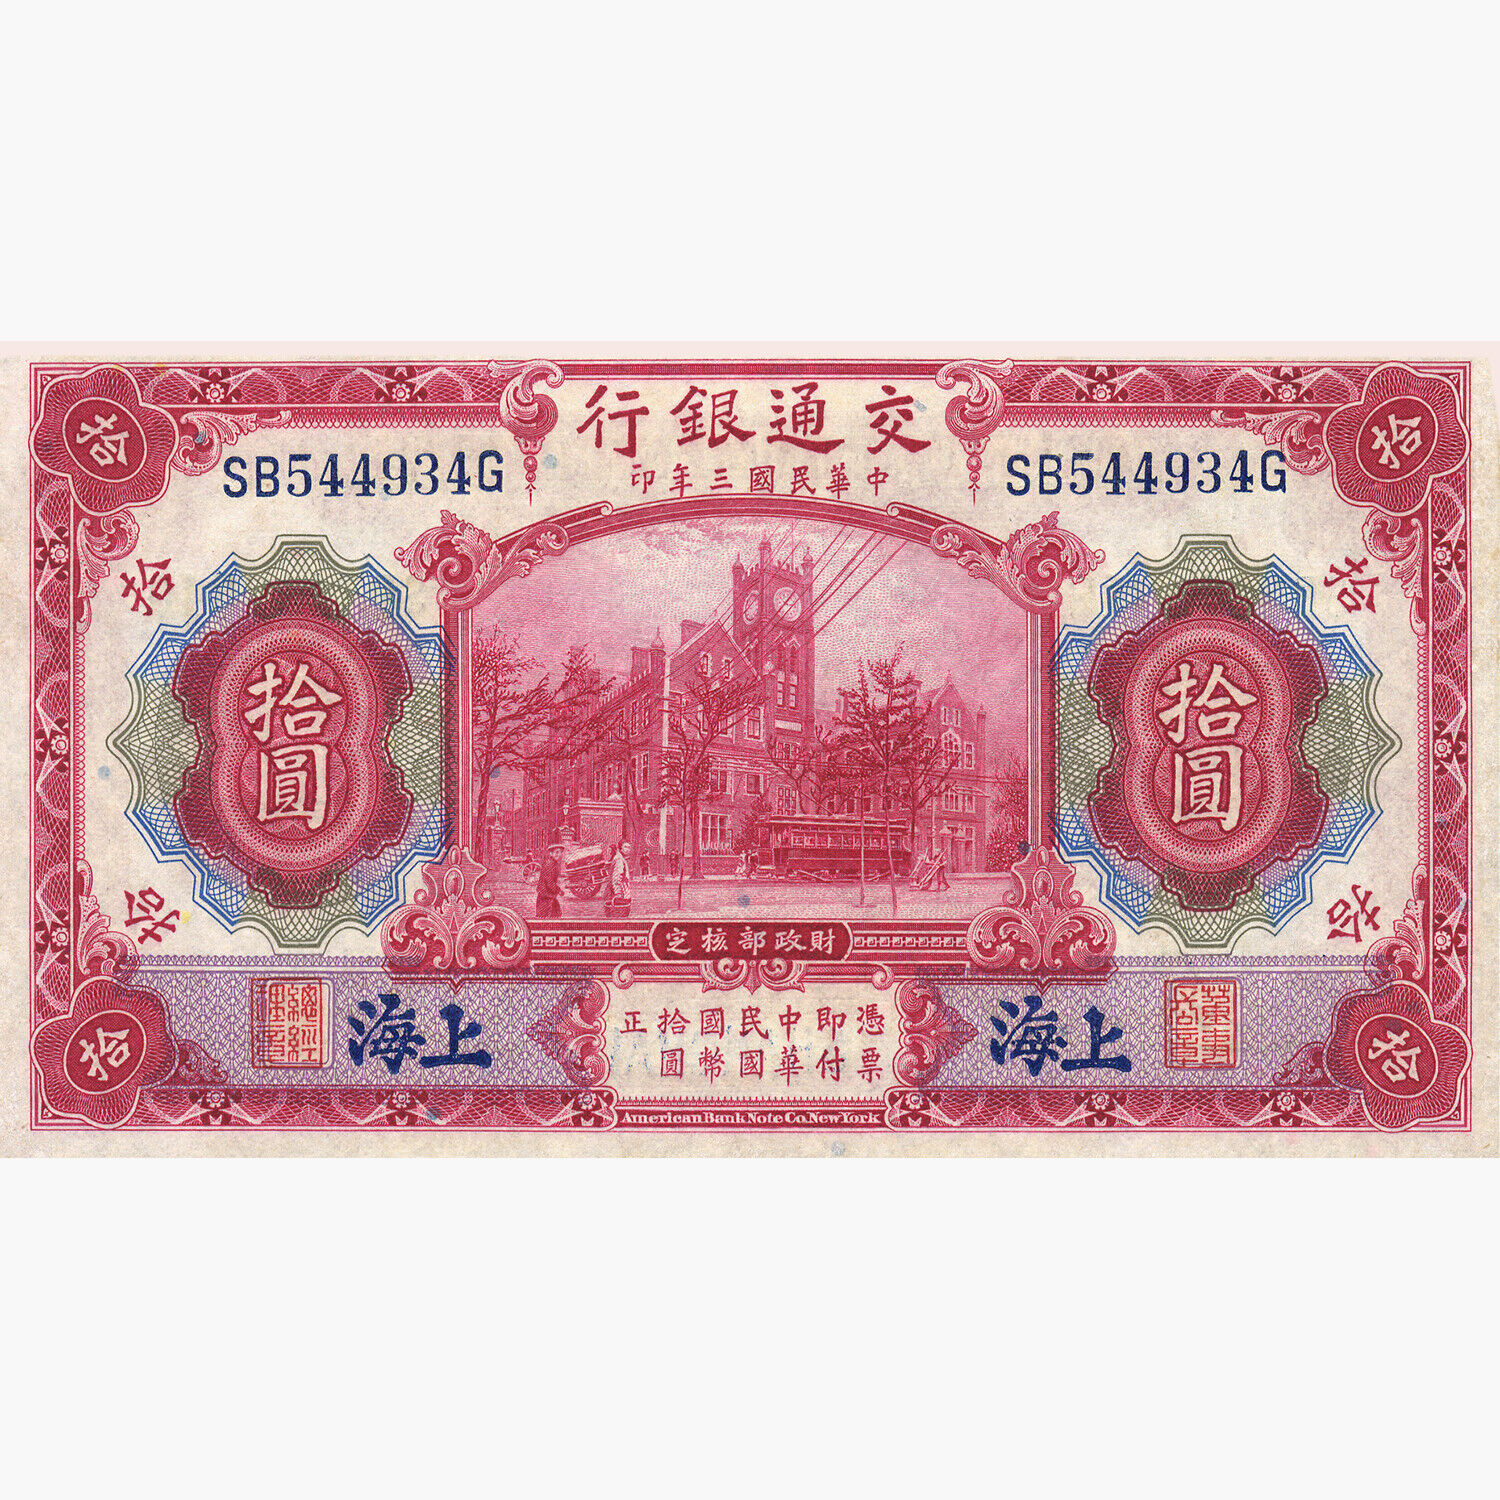 Historic Banknote from China